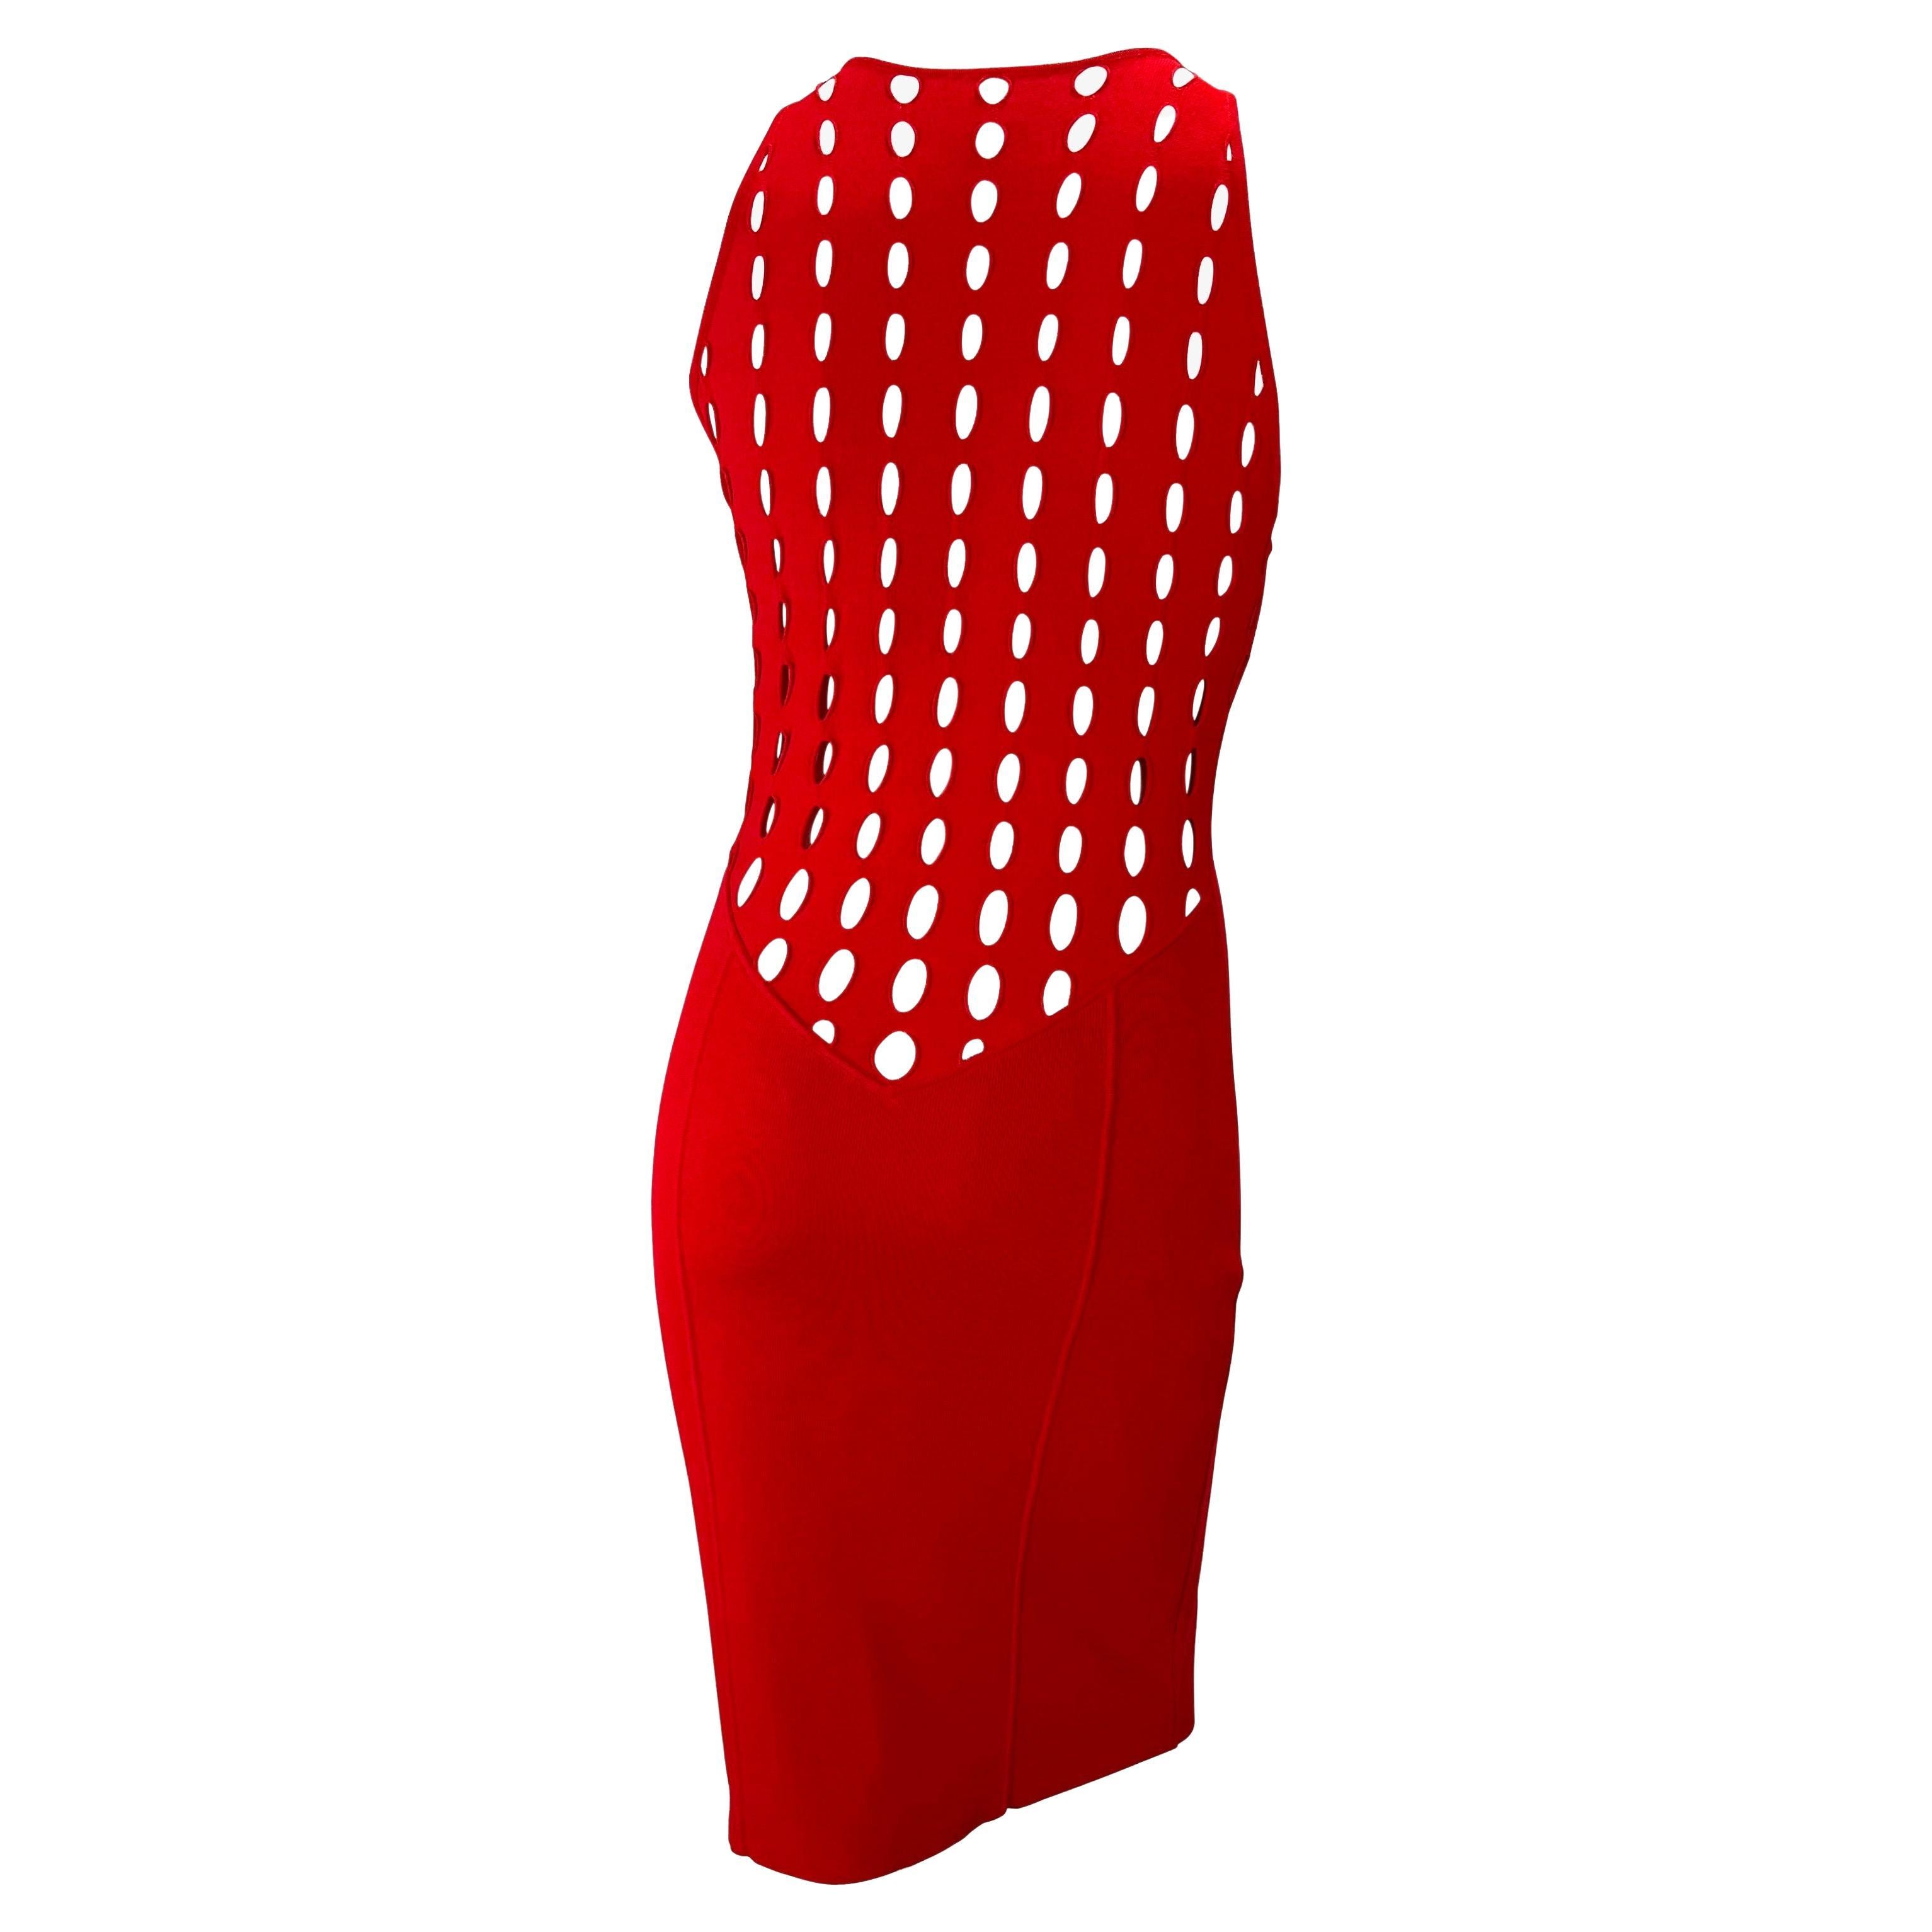 S/S 2002 Gianni Versace by Donatella Red Eyelet Cutout Racerback Dress extensible